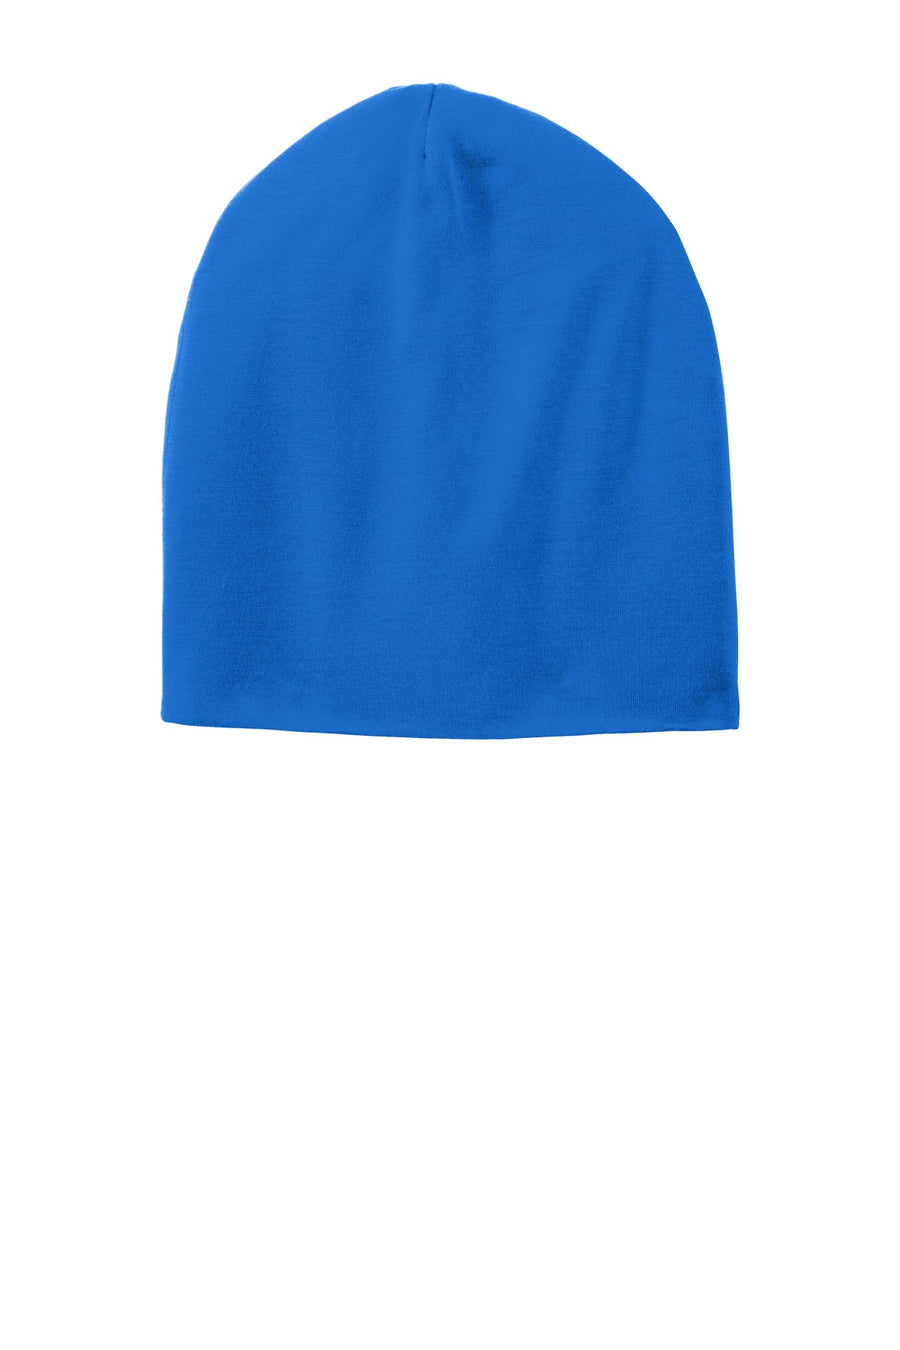 Sport-Tek PosiCharge Competitor Cotton Touch Jersey Knit Slouch Beanie.